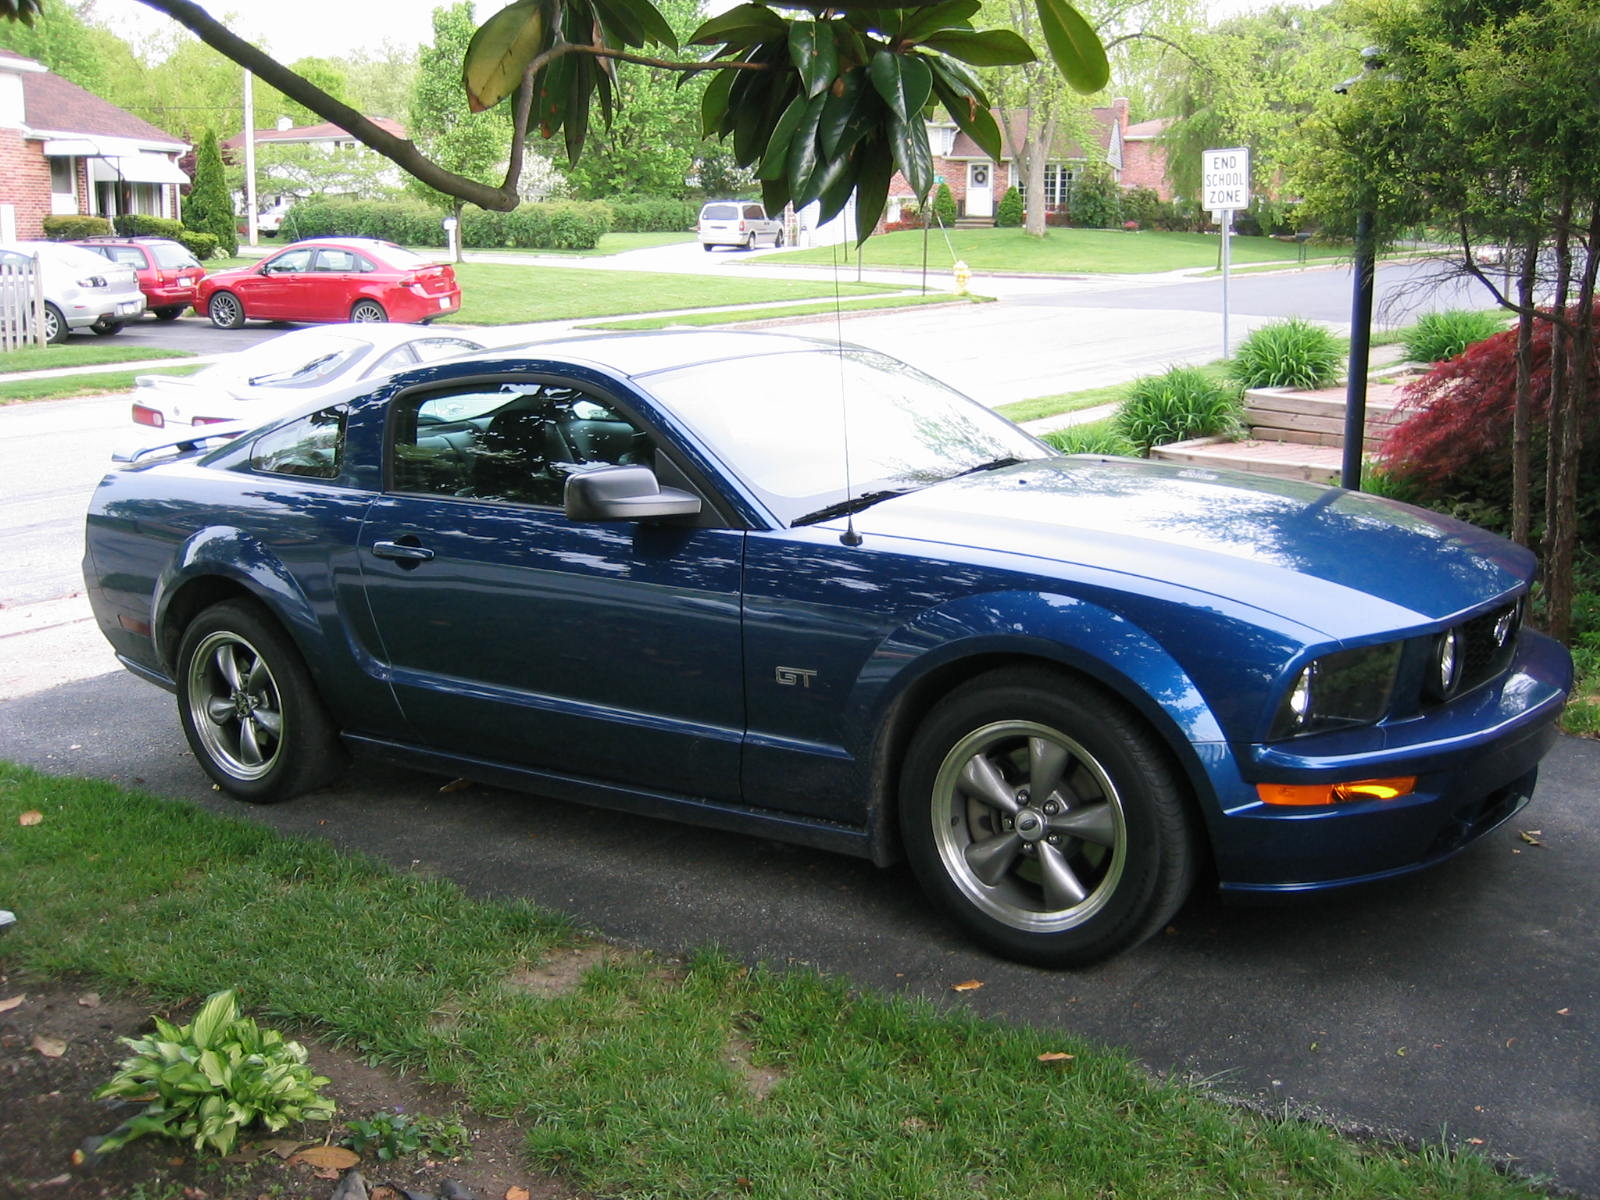 2006 Ford mustang gt 0-60 time #7